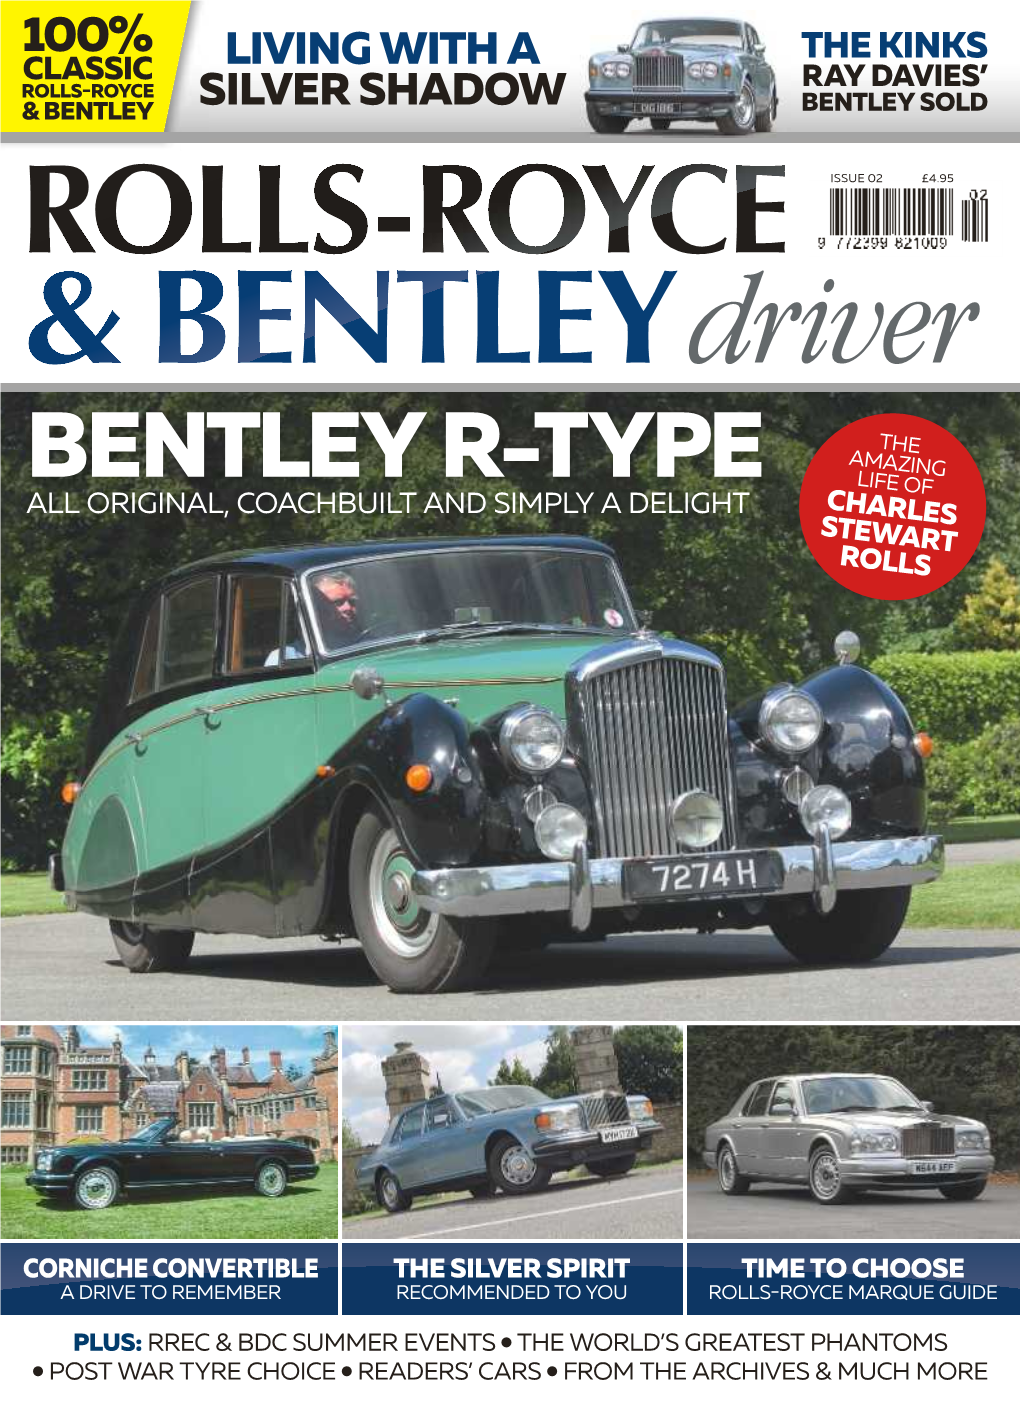 Bentley R-Type Life of All Original, Coachbuilt and Simply a Delight Charles Stewart Rolls